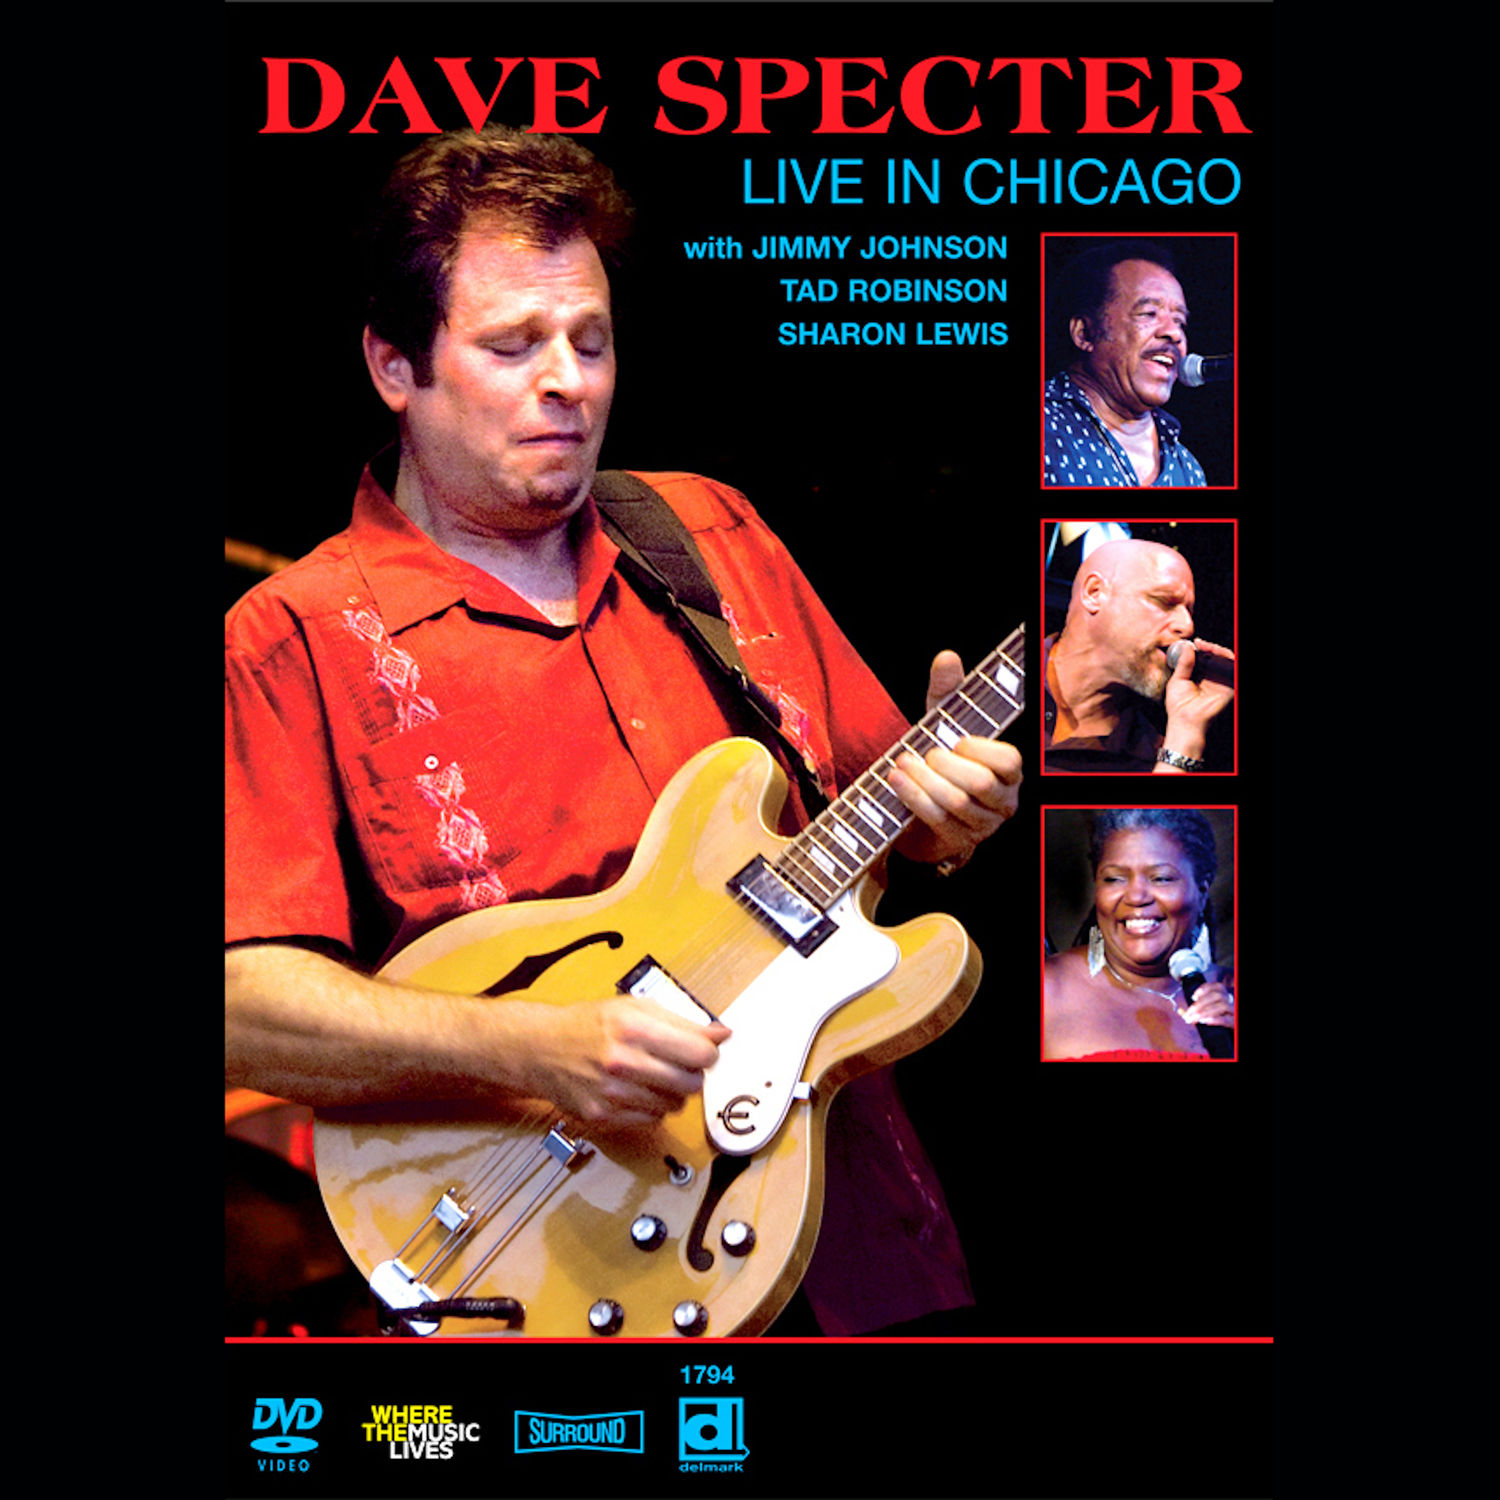 Dave Specter With Jimmy Johnson, Tad Robinson, Sharon Lewis – Live in Chicago (2008) [FLAC 24bit/48kHz]